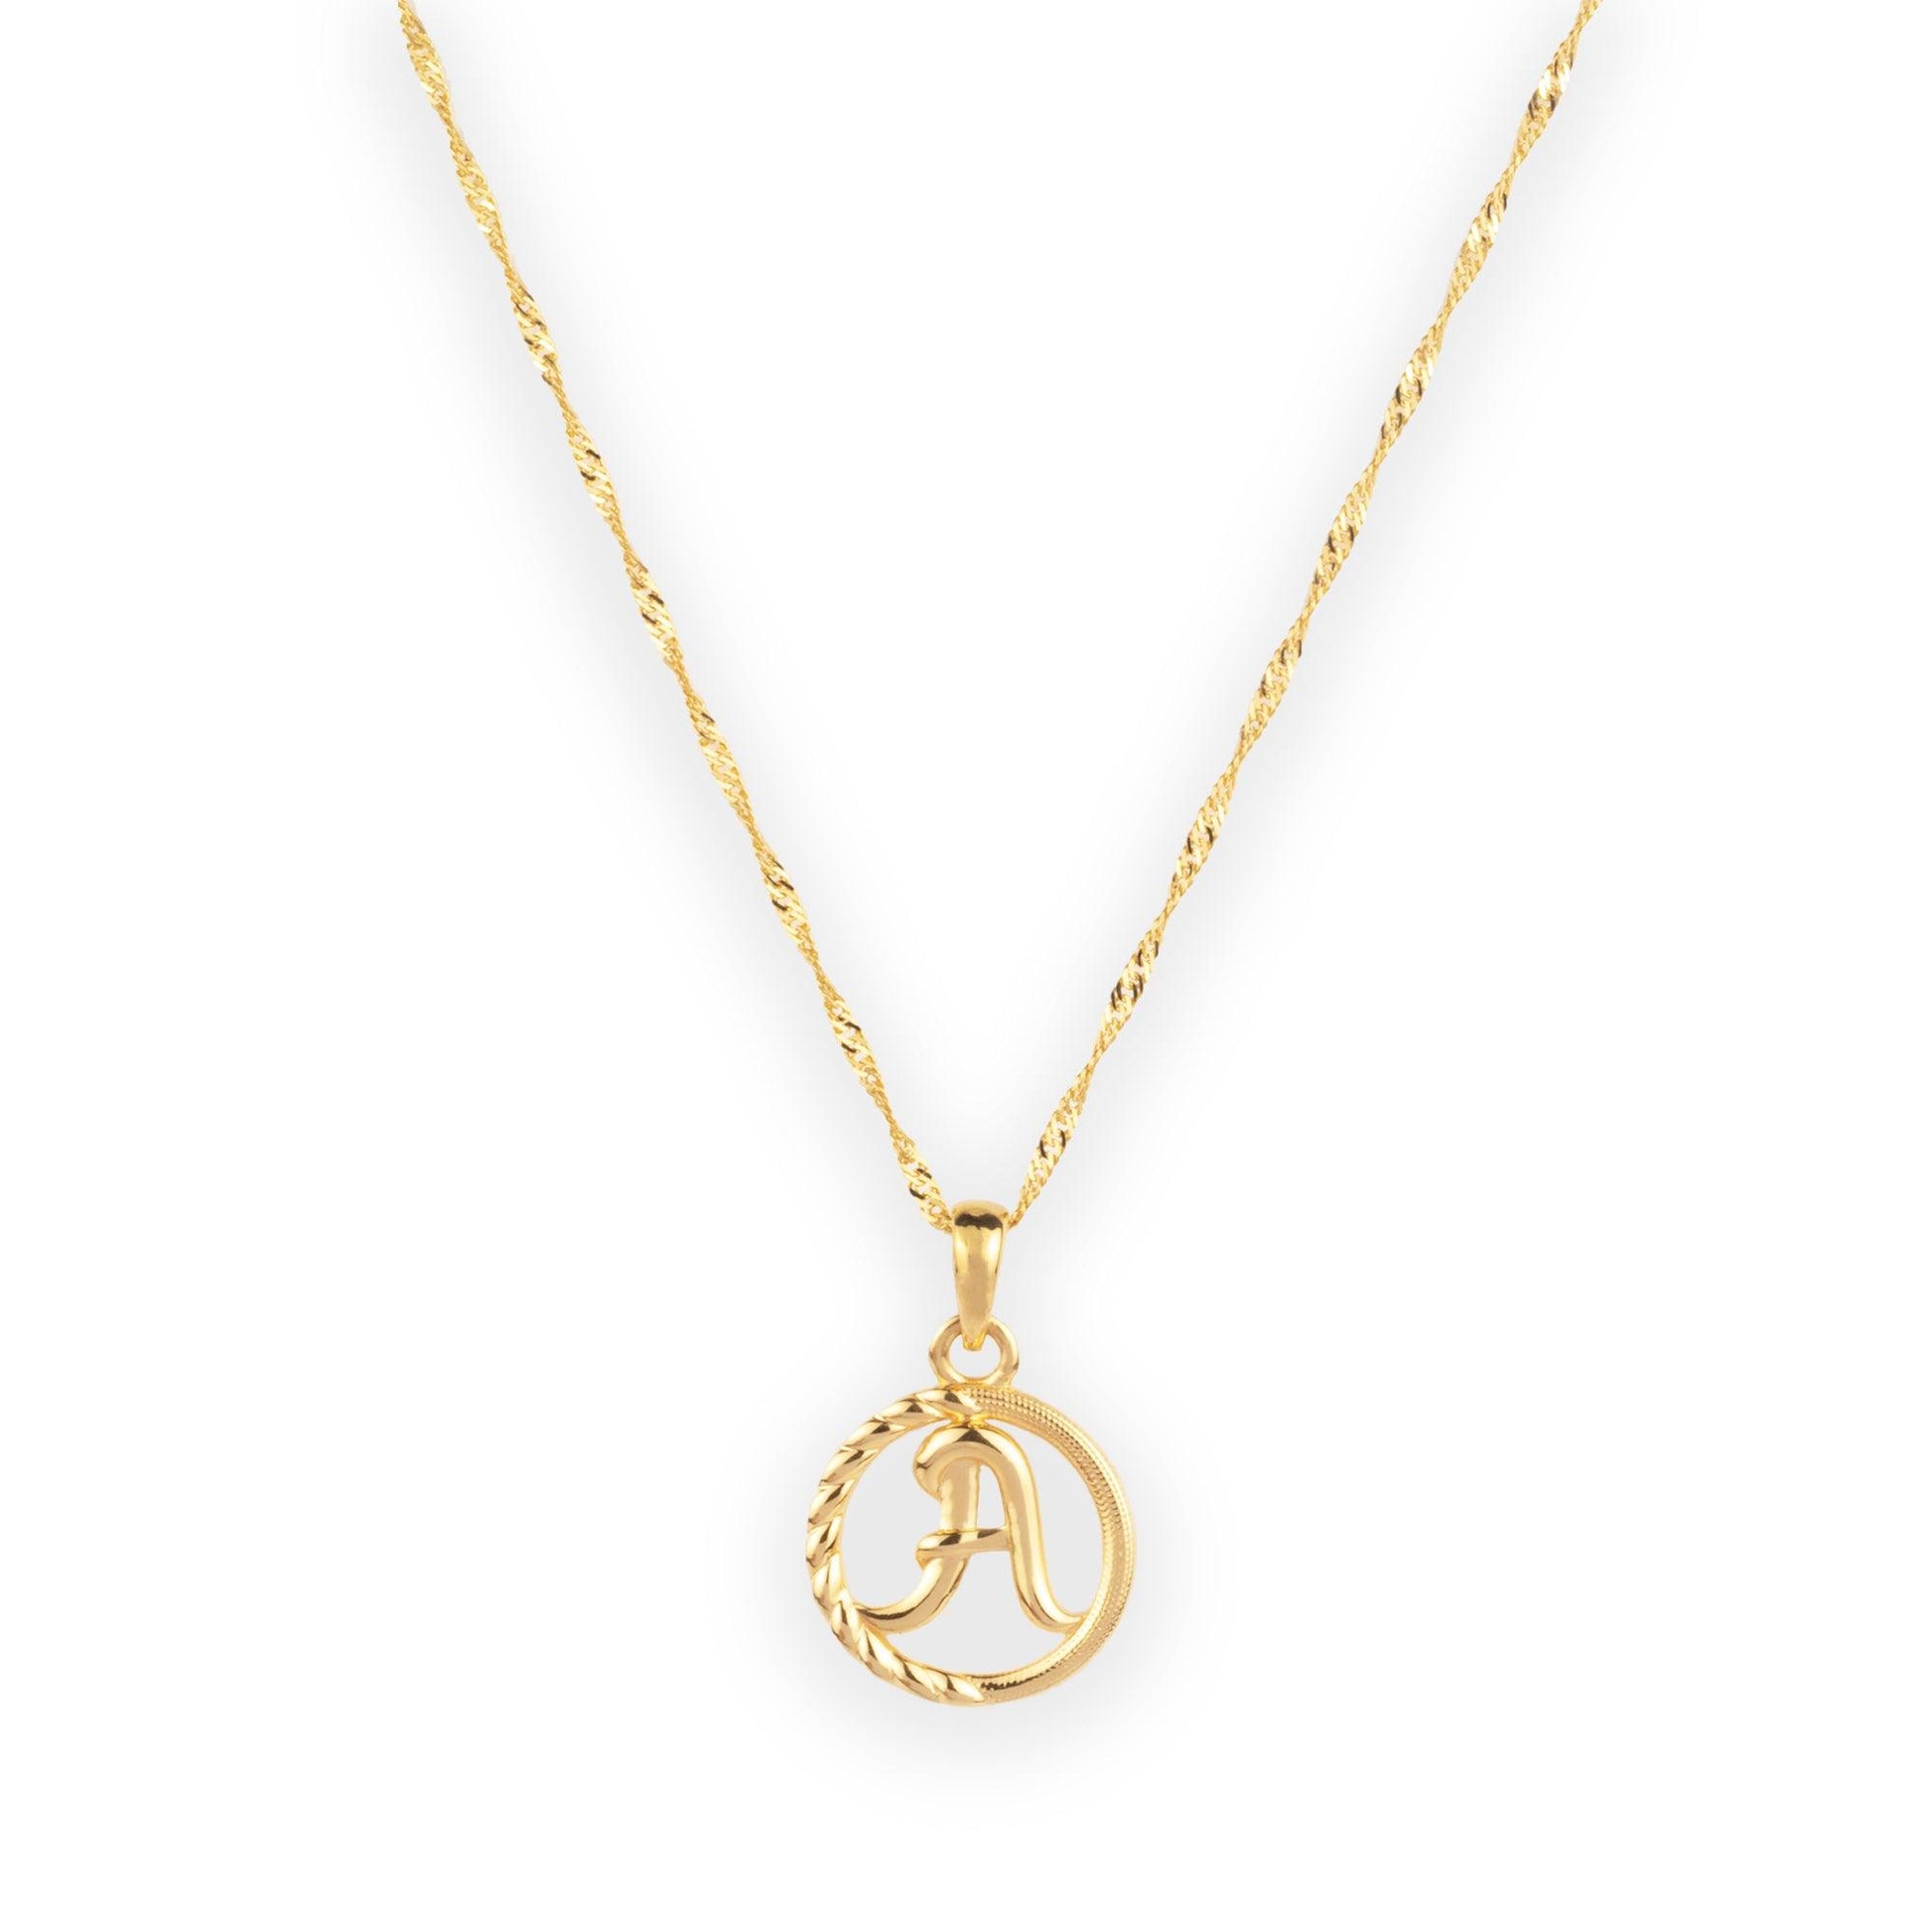 'A' 22ct Gold Circle Initial Pendant P-7034-A - Minar Jewellers